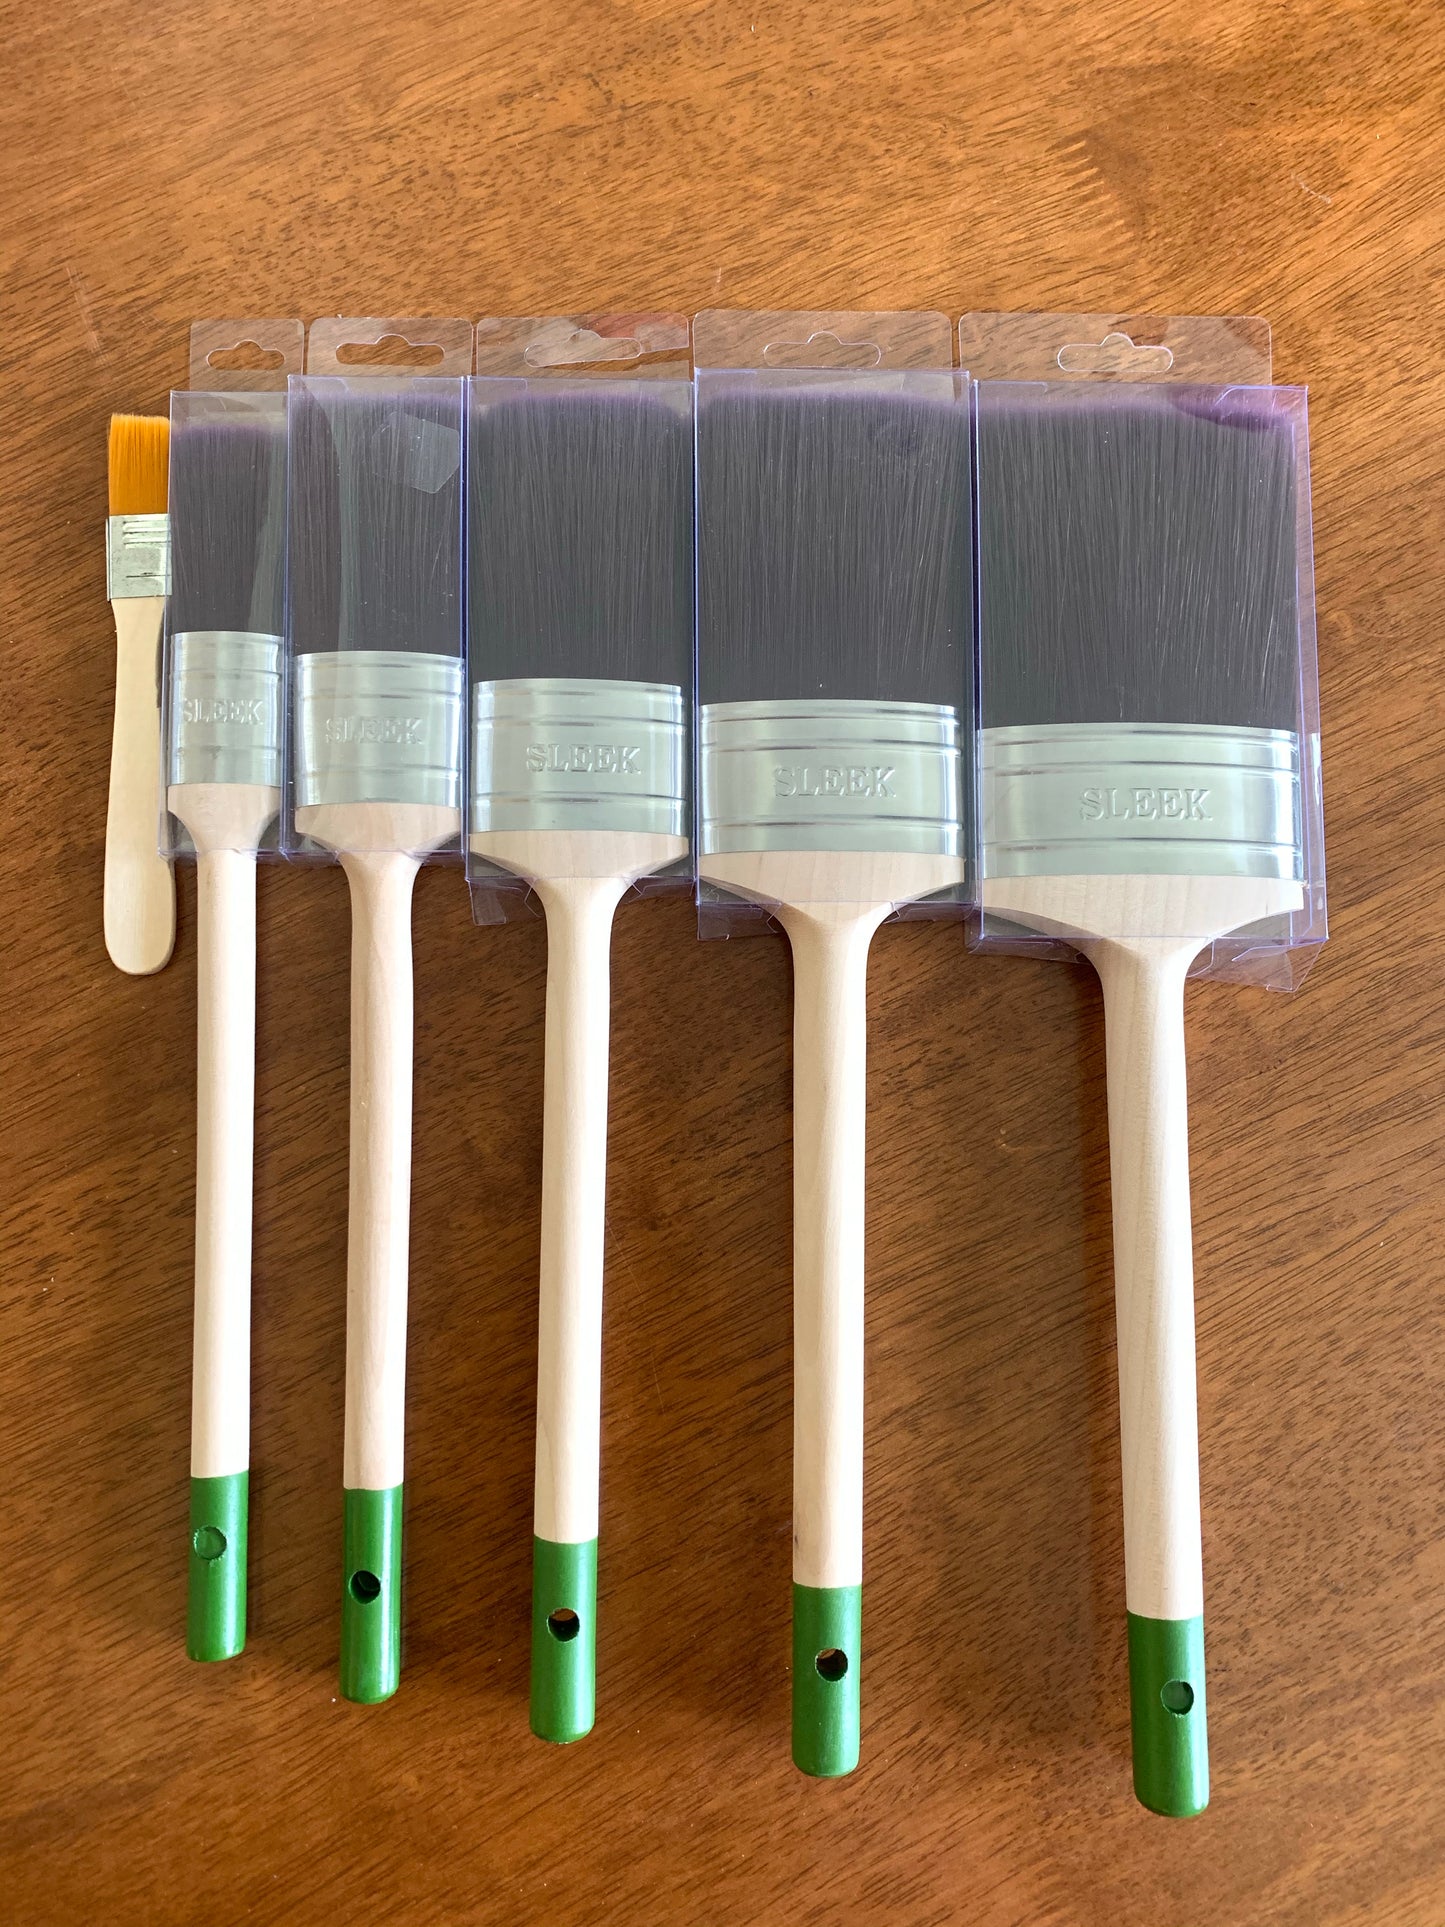 Sleek Trial pack of 15, 25, 38, 50, 63, and 75mm Premium Paint Brushes